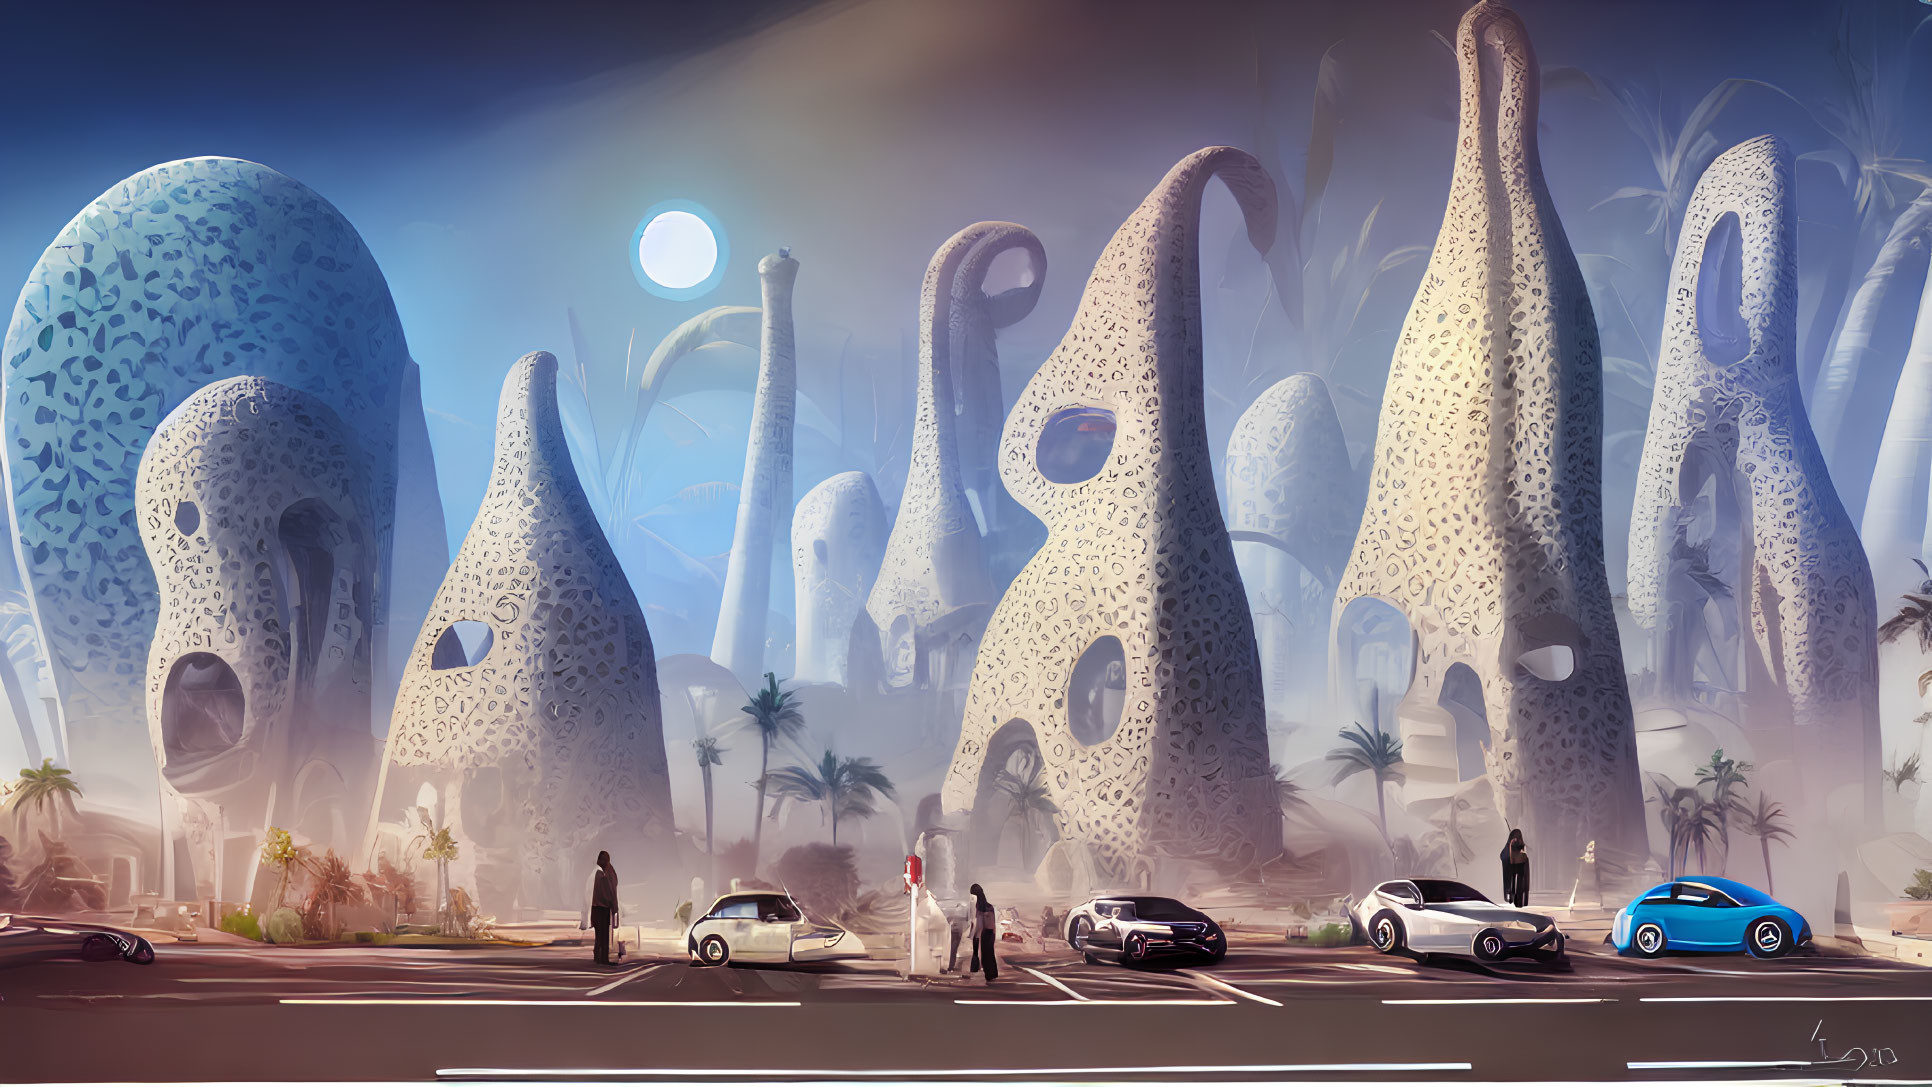 Futuristic cityscape with organic structures, palm trees, cars, pedestrians, and dual moons